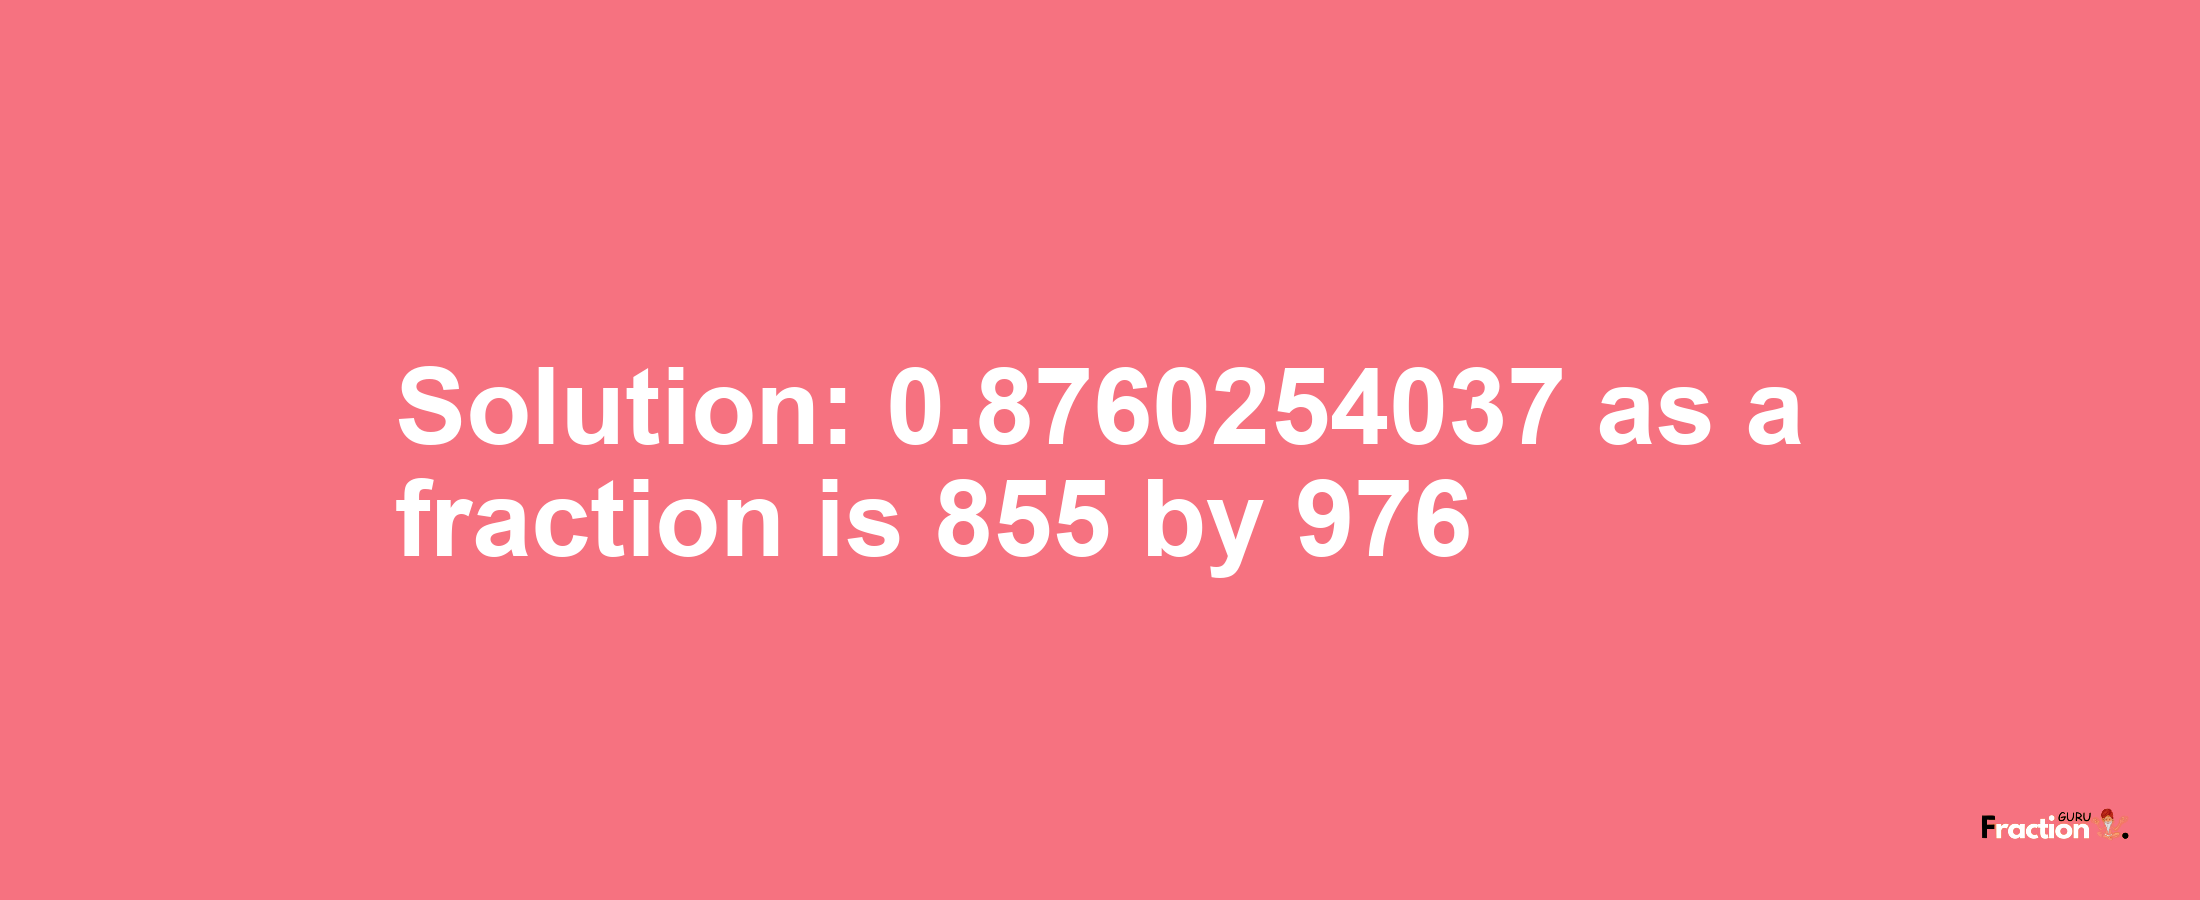 Solution:0.8760254037 as a fraction is 855/976